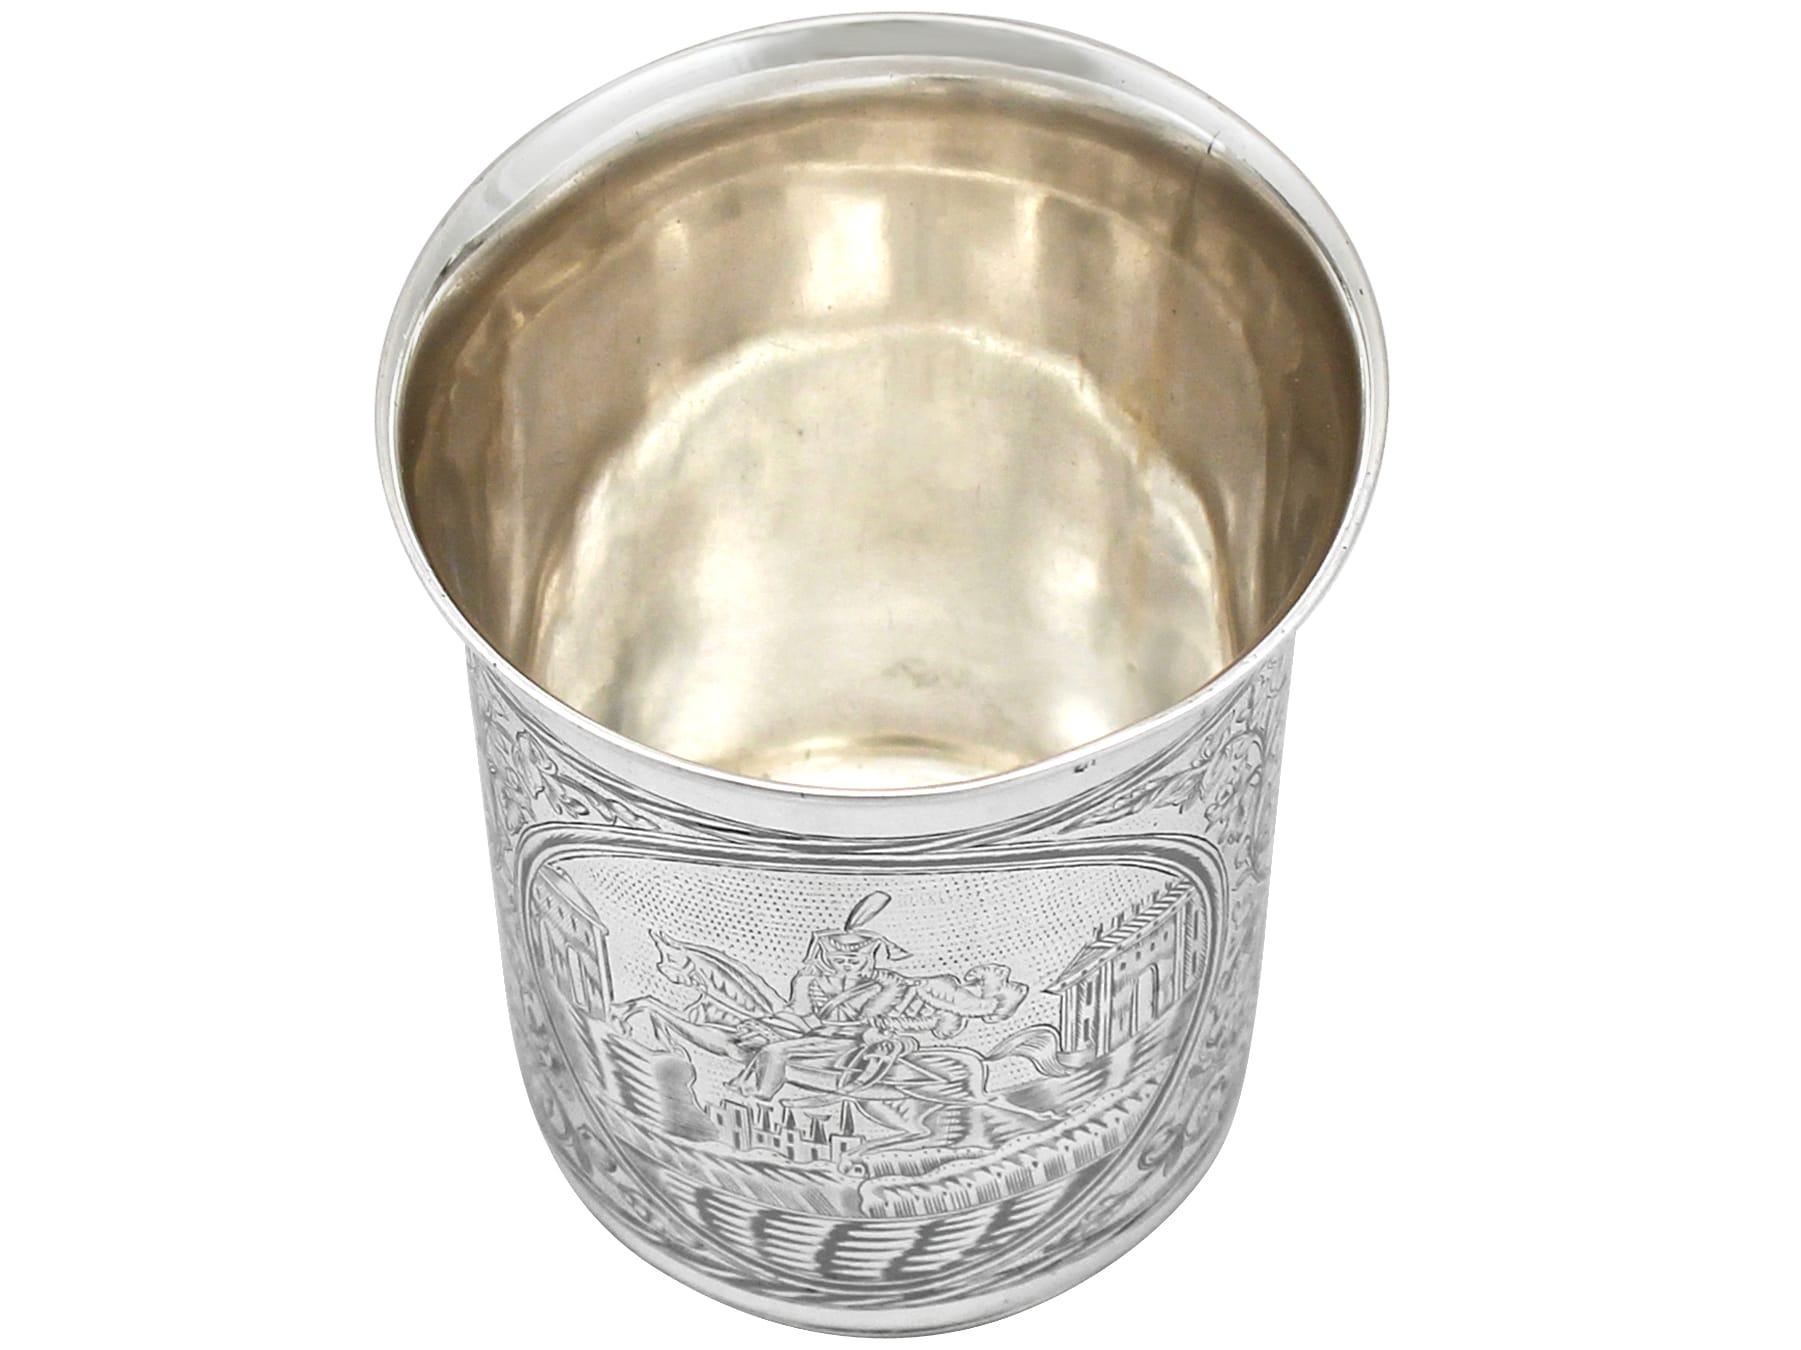 Antique 1839 Russian Silver and Niello Enamel Beaker In Excellent Condition For Sale In Jesmond, Newcastle Upon Tyne